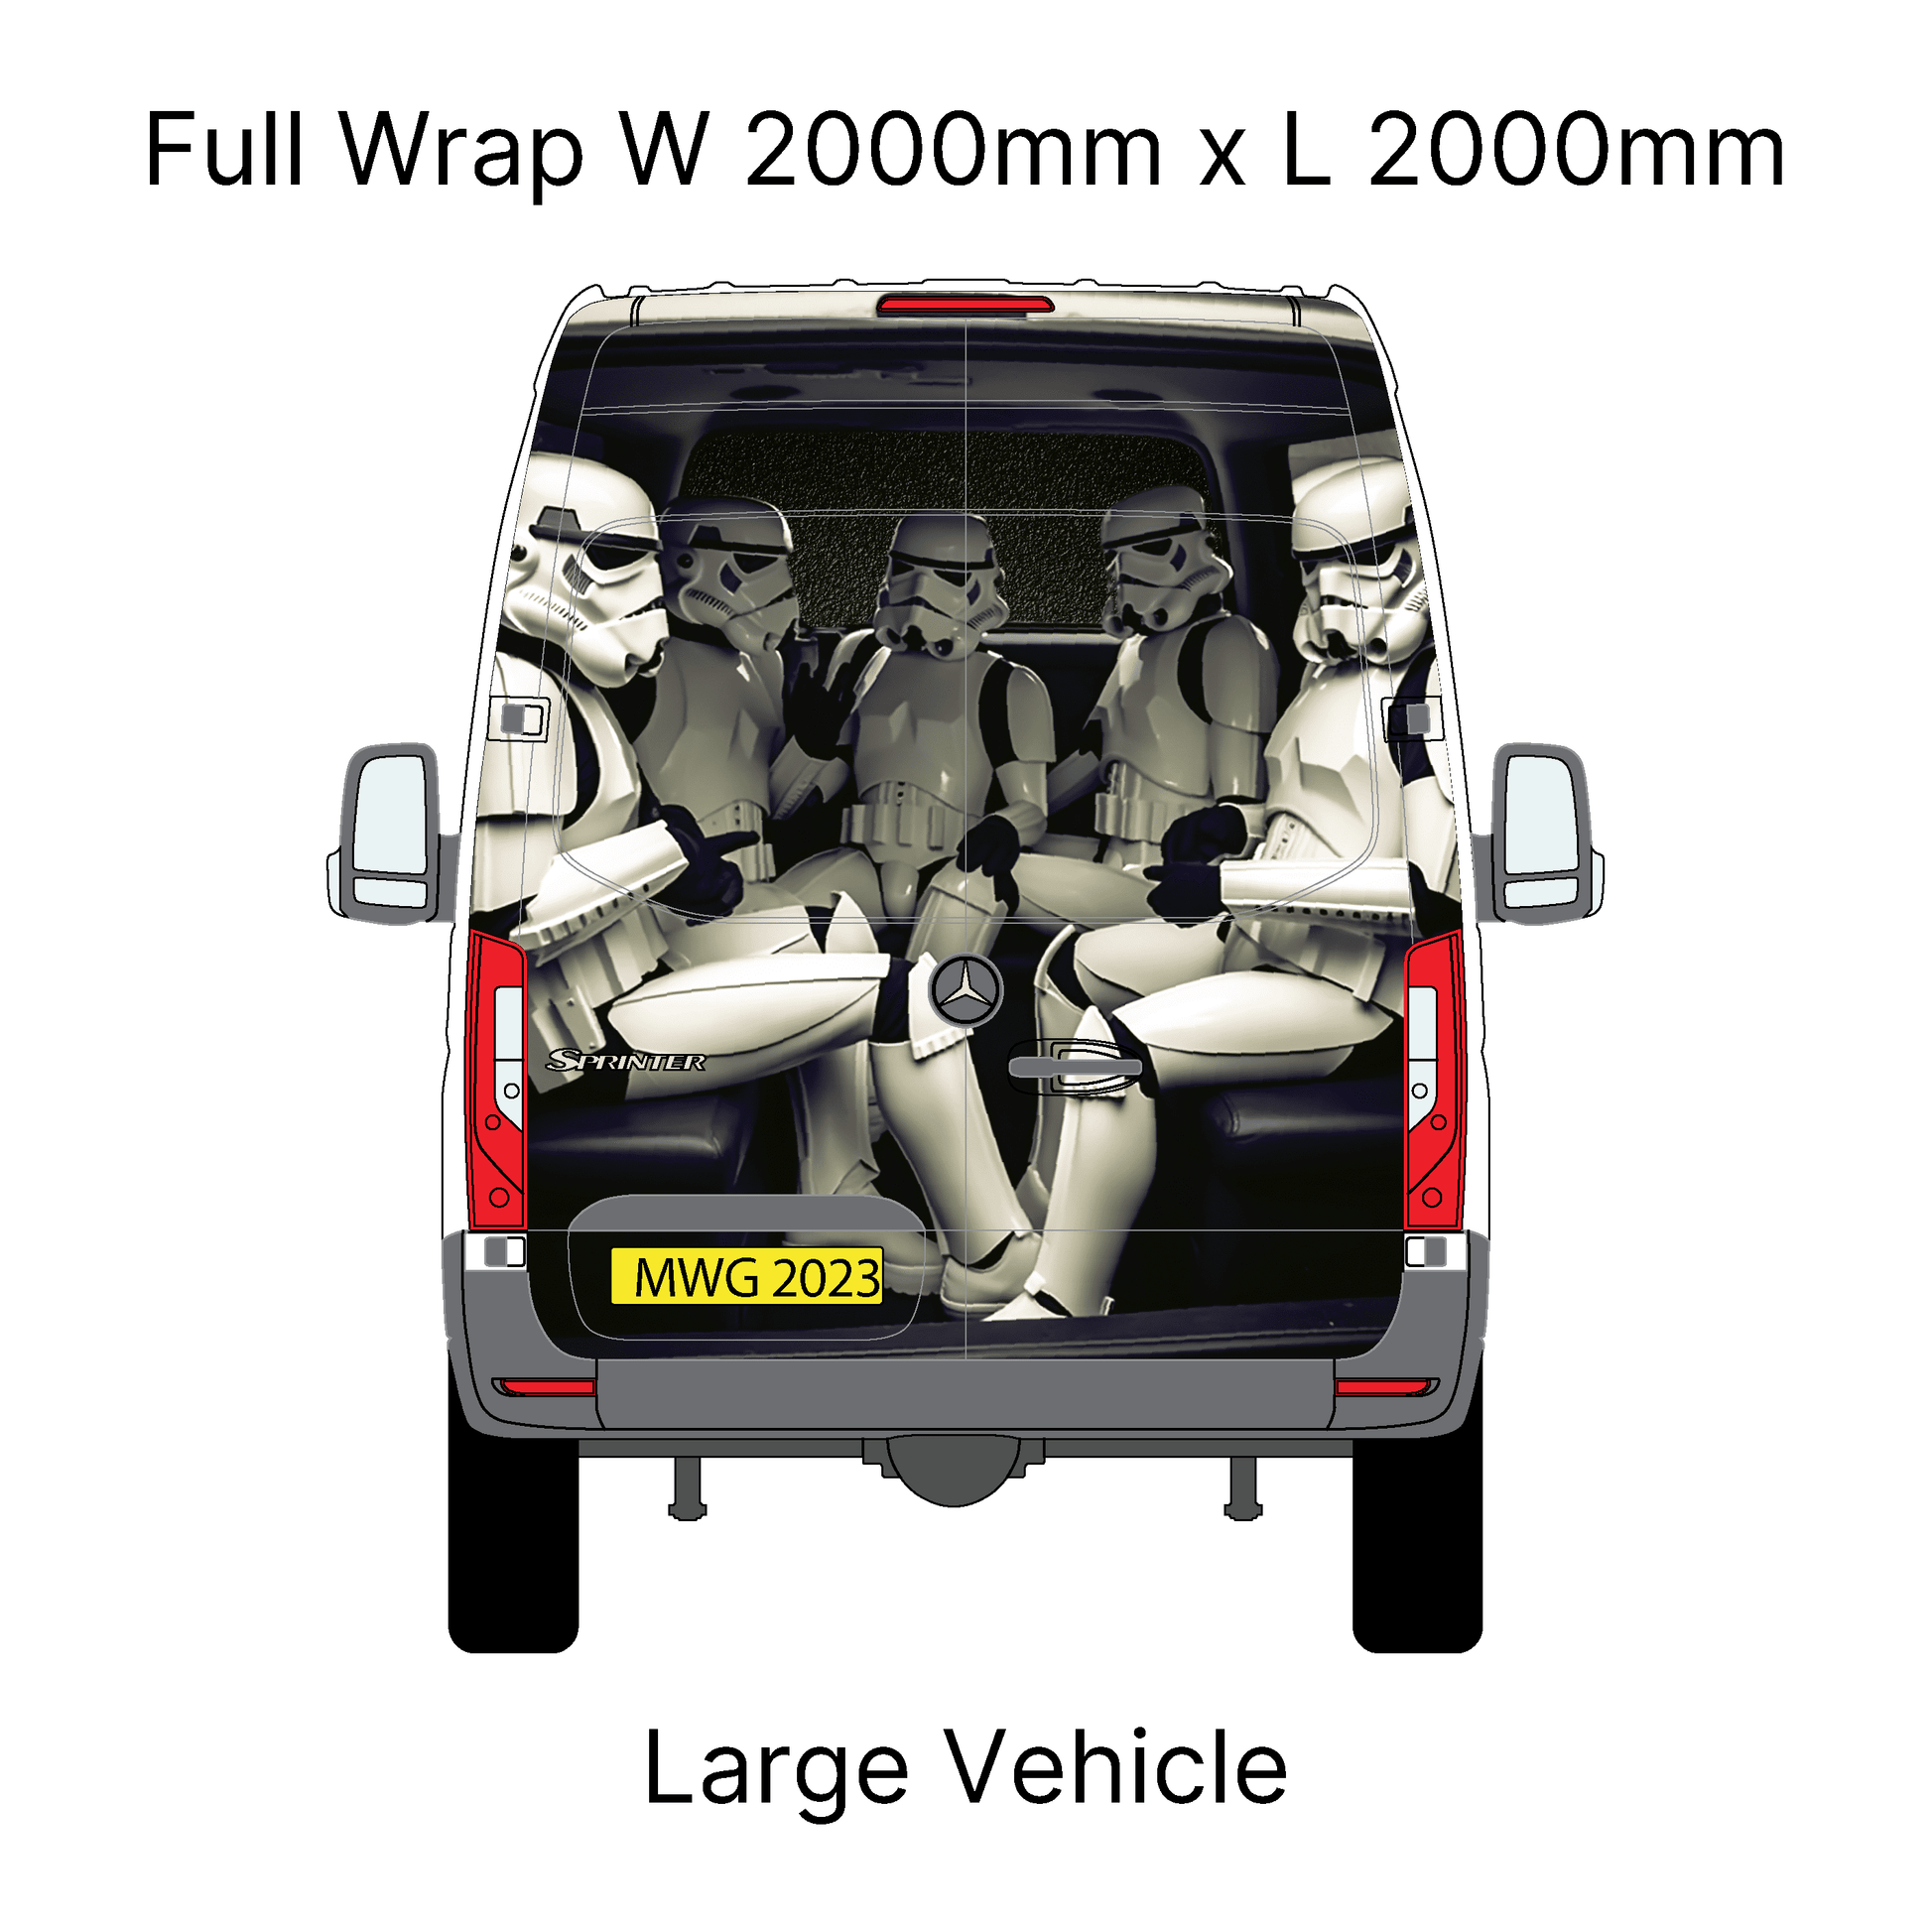 Stormtrooper Wrap For A Large Van